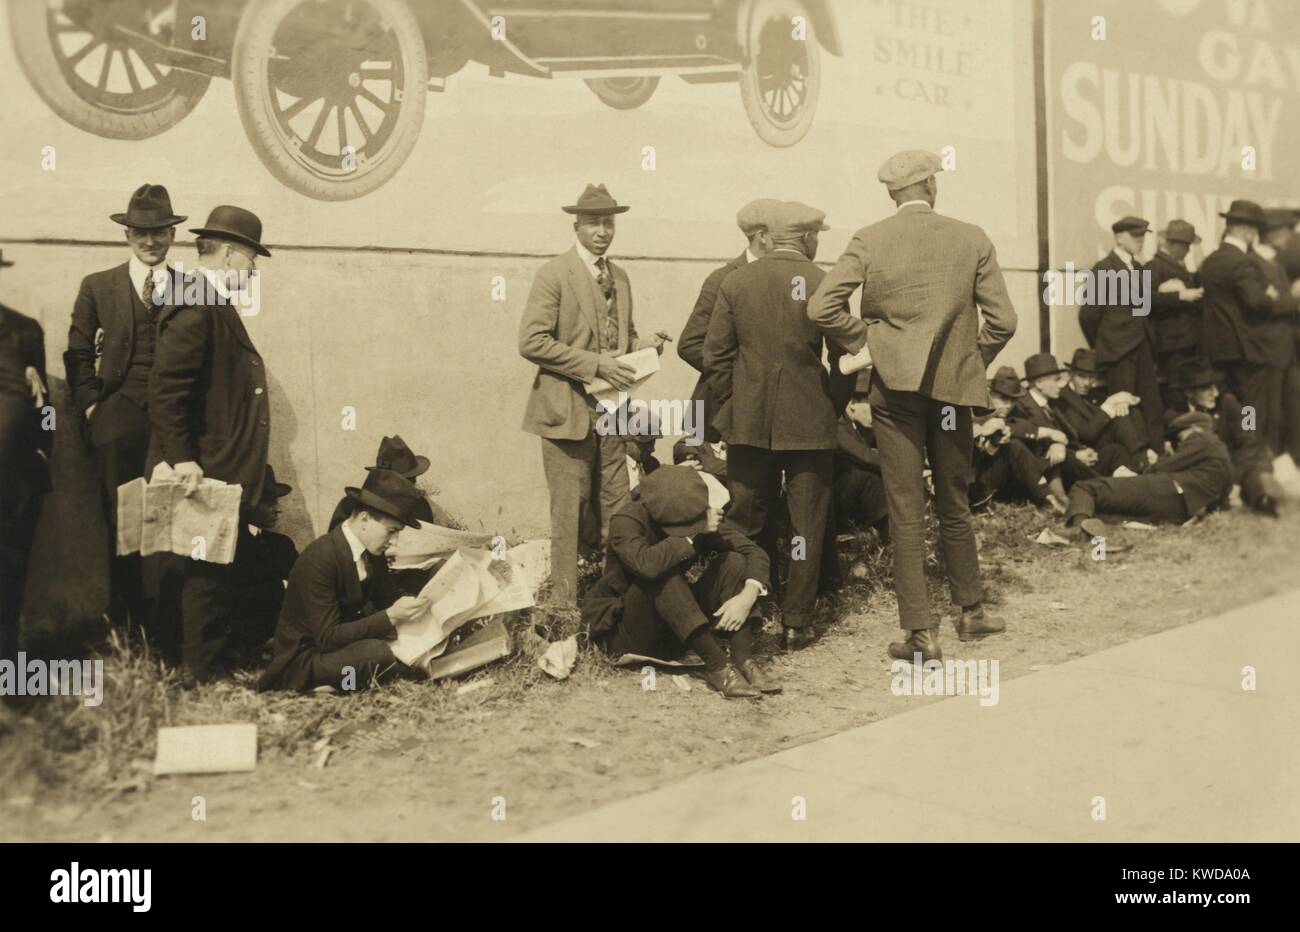 Dodgers baseball fans wait in line at Ebbets Field before a World Series game, Oct. 6, 1920. The Cleveland Indians beat the Brooklyn Dodgers in seven games. (BSLOC 2015 17 3) Stock Photo